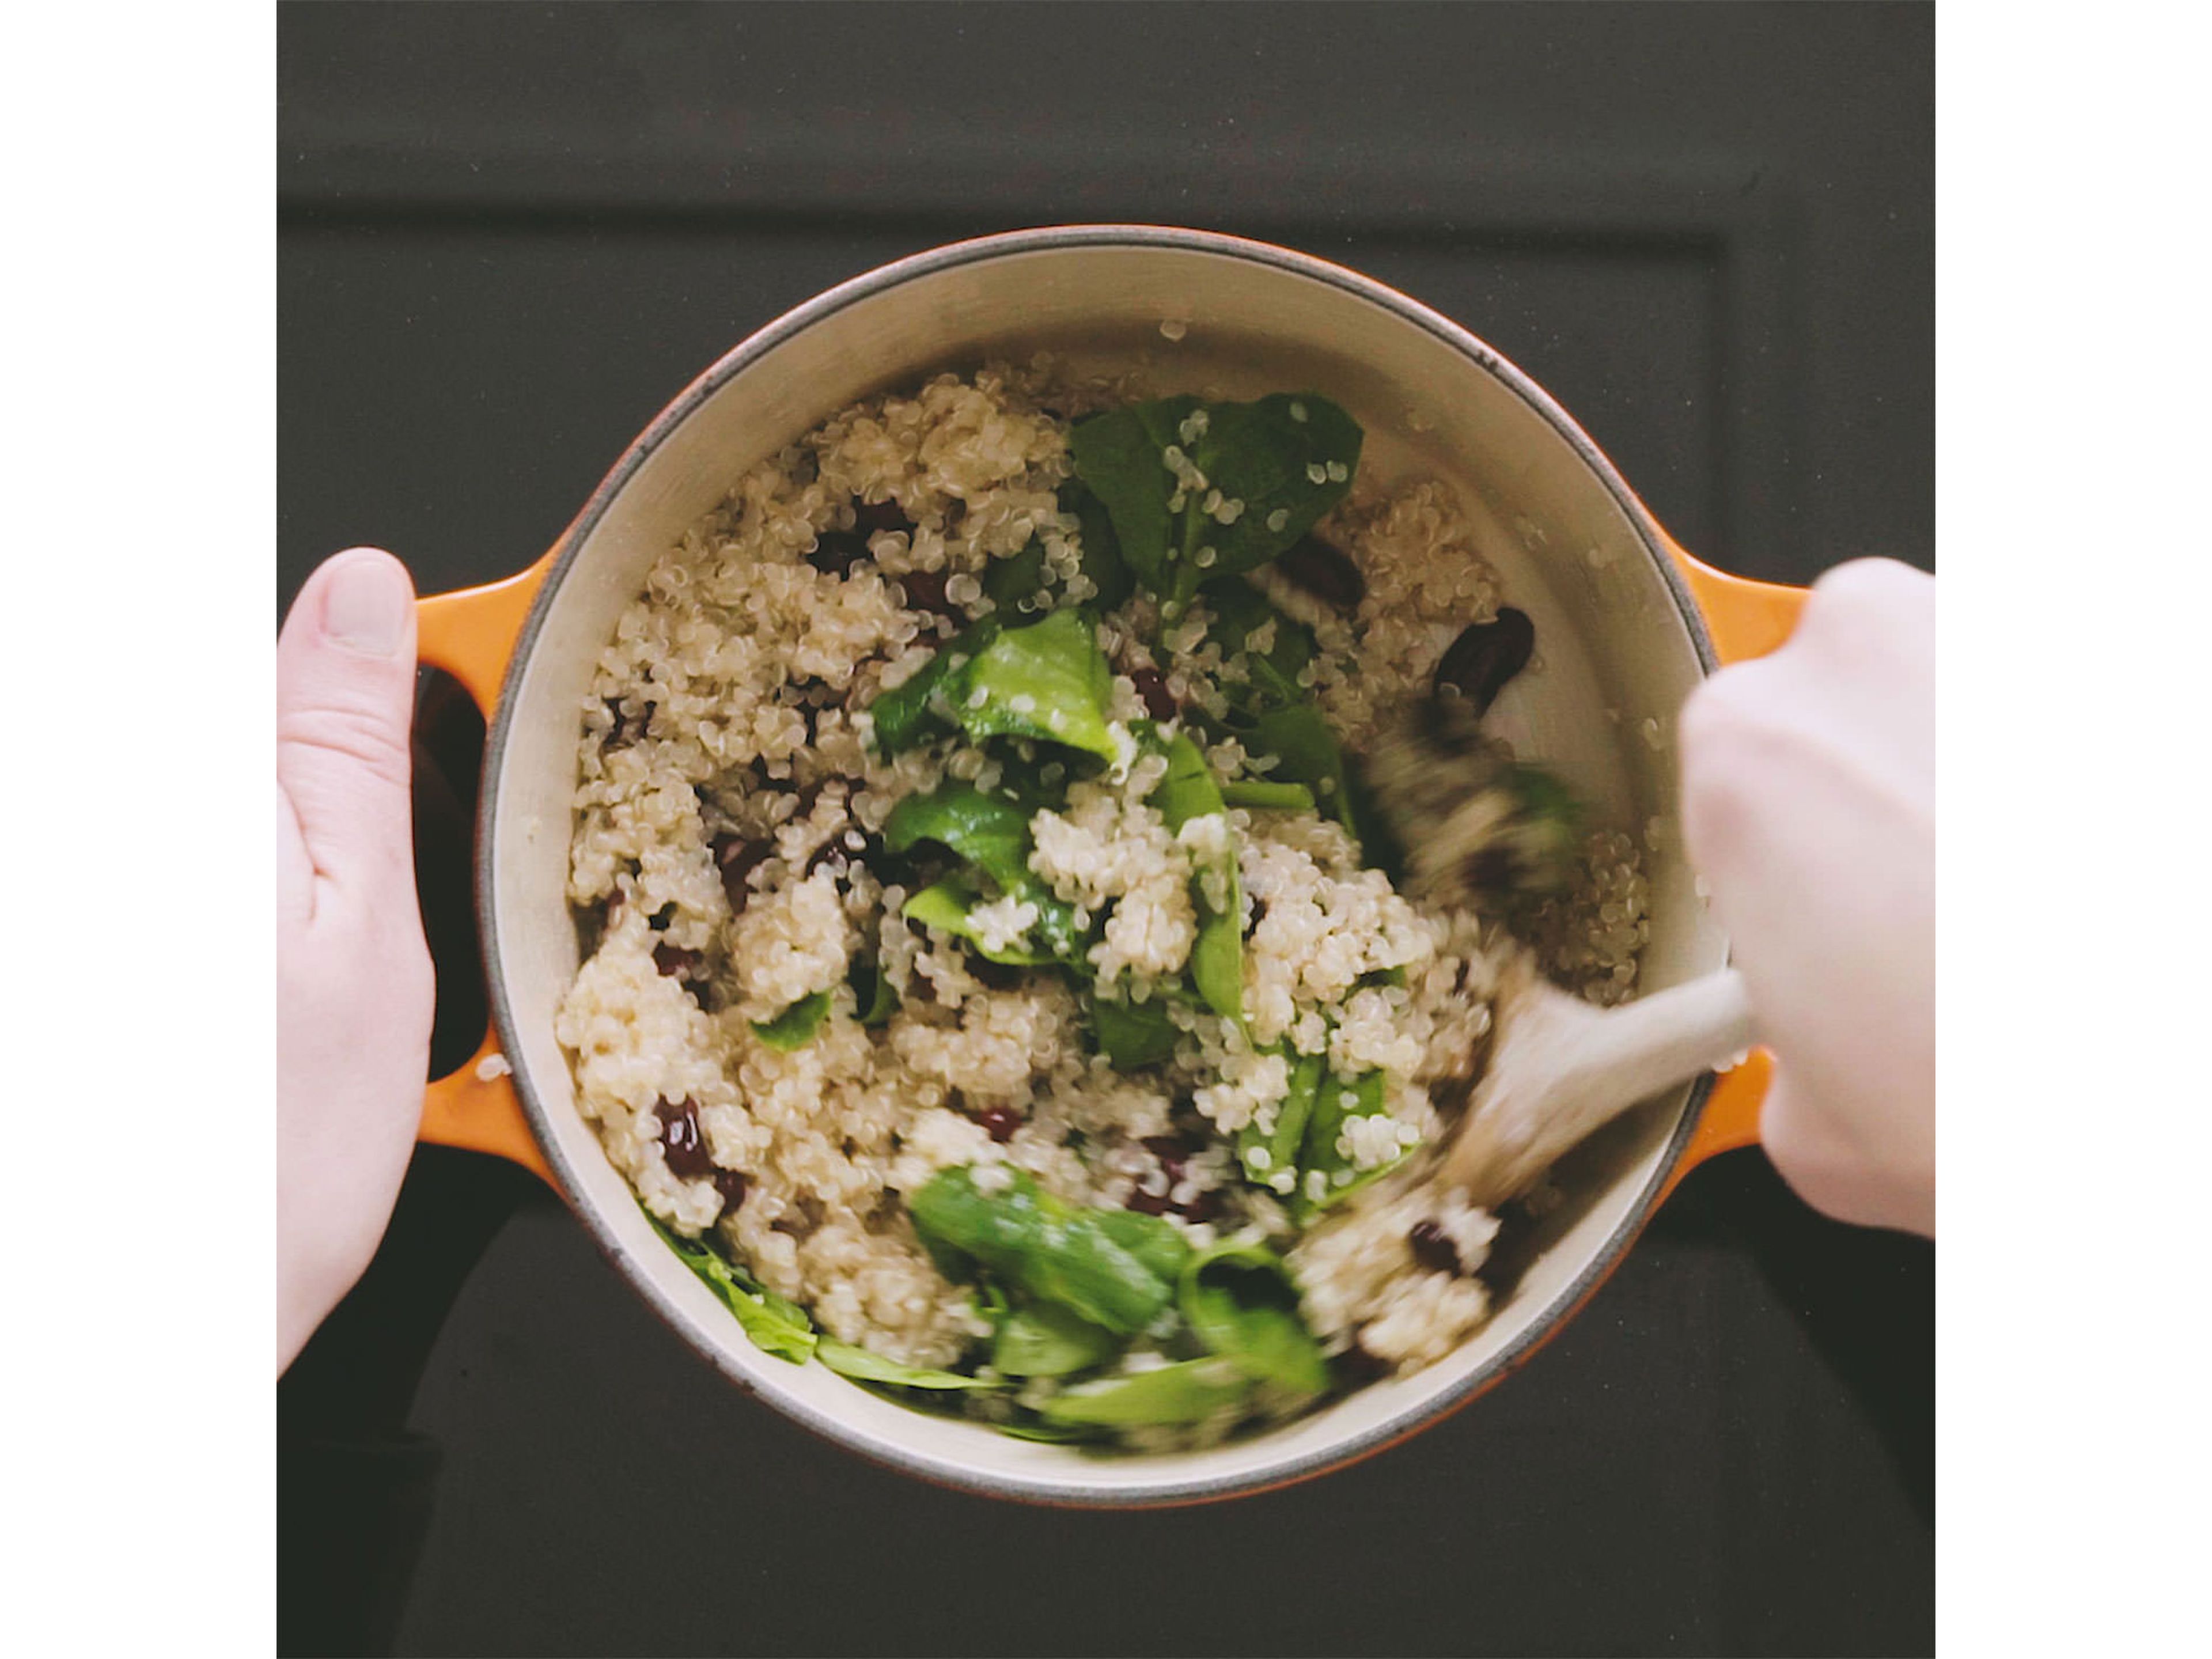 Add cooked quinoa and torn spinach leaves to bean mixture with a pinch of salt. Stir to combine, then partially cover and let cook over low heat for approx. 2 min.